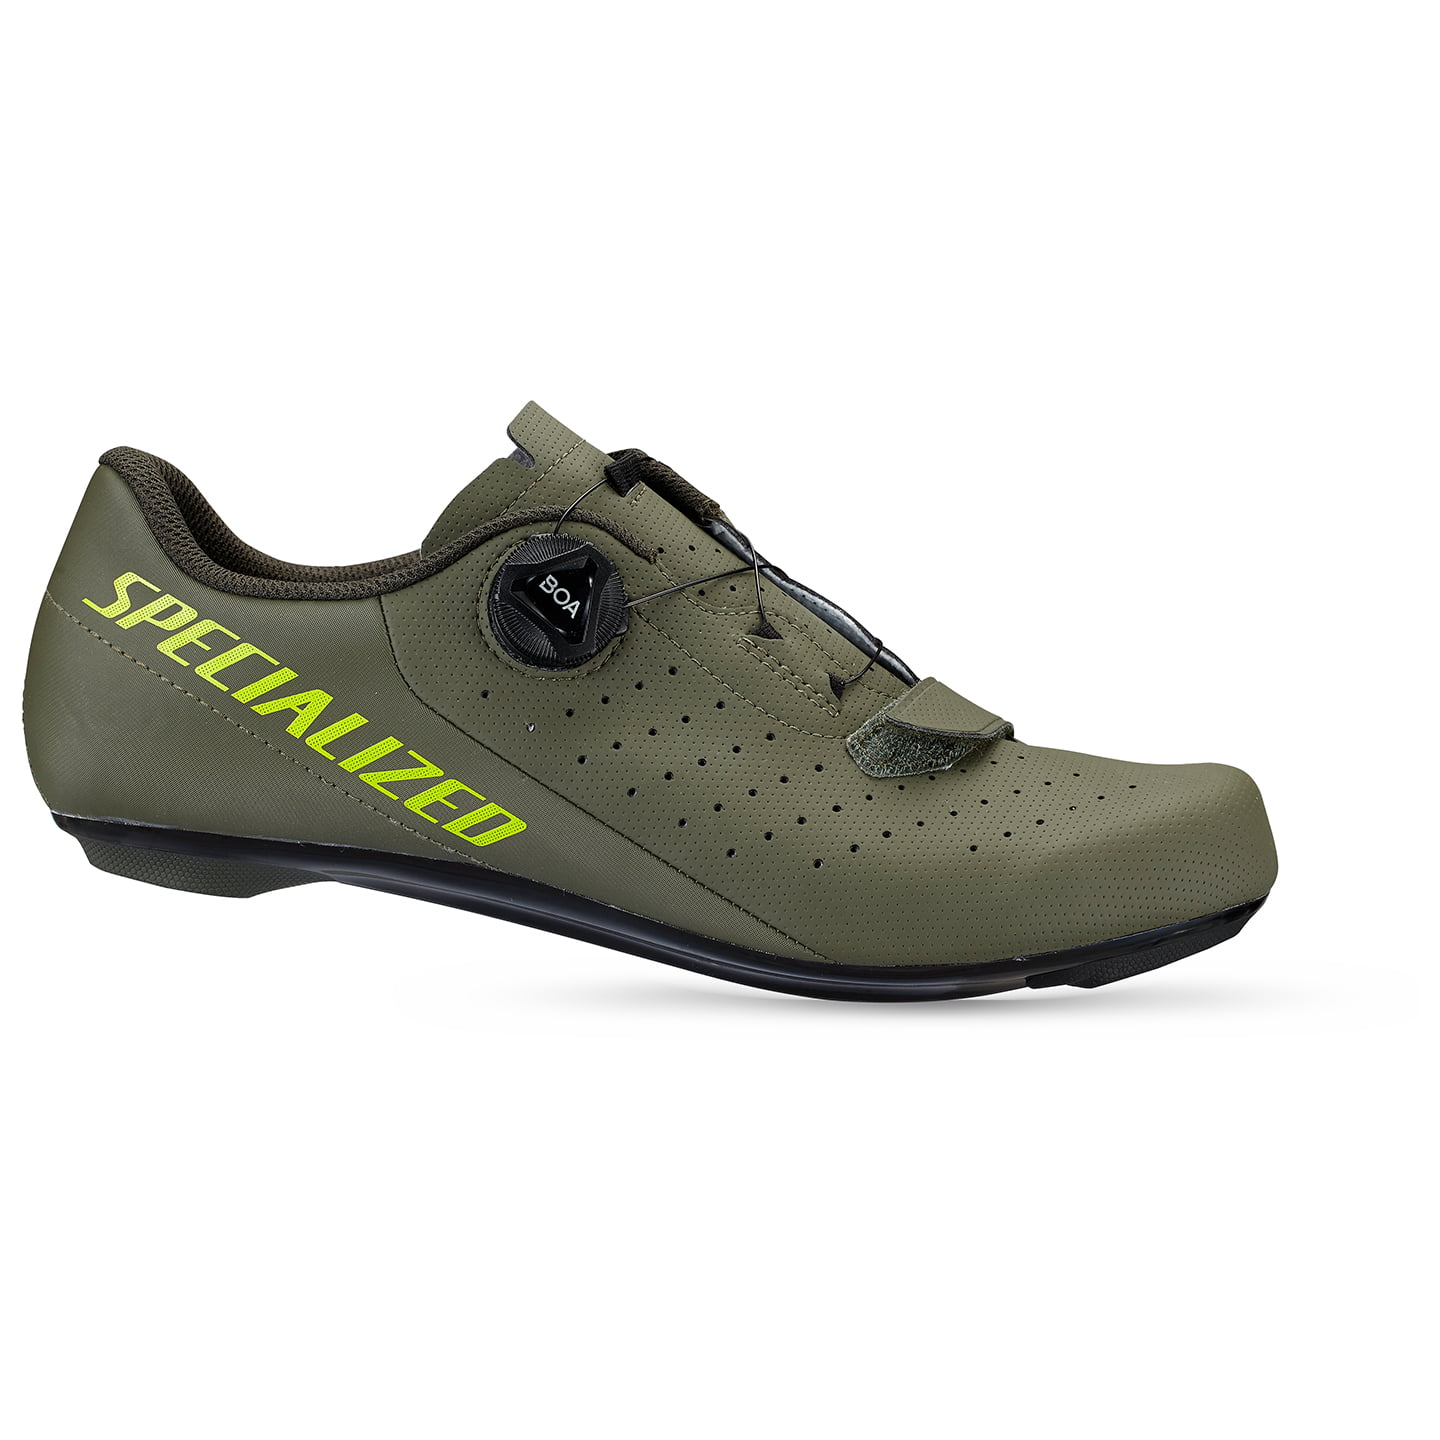 Torch 1.0 2023 Road Bike Shoes Road Shoes, for men, size 39